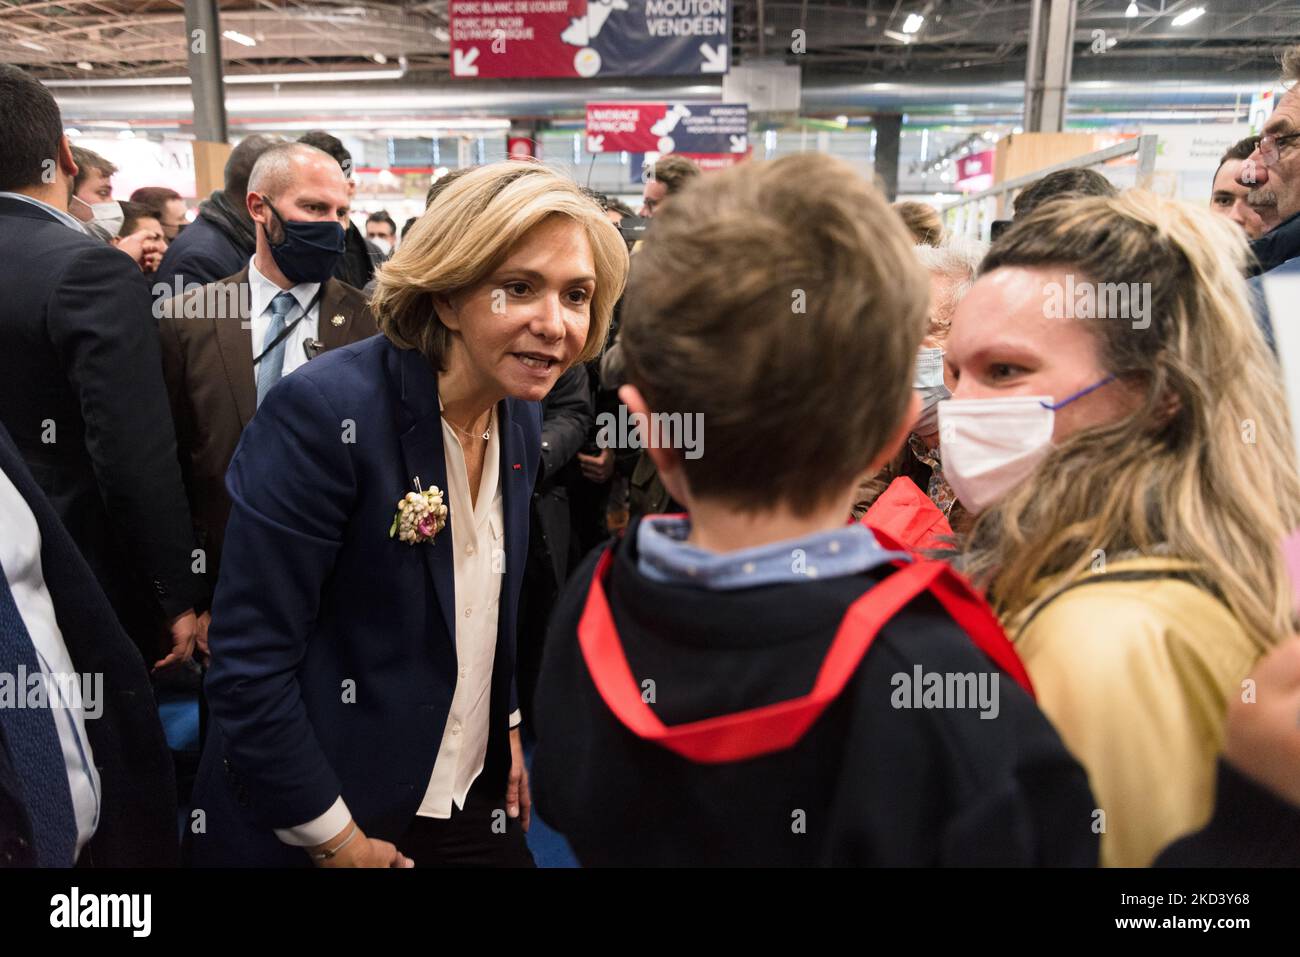 Valérie Pécresse, French presidential candidate for the liberal right-wing party Les Républicains (LR), chats with a child she met in an aisle during the traditional visit of presidential candidates to the International Agricultural Show currently held at the Parc des Exposition de la Porte de Versailles in Paris on February 28, 2022. (Photo by Samuel Boivin/NurPhoto) Stock Photo